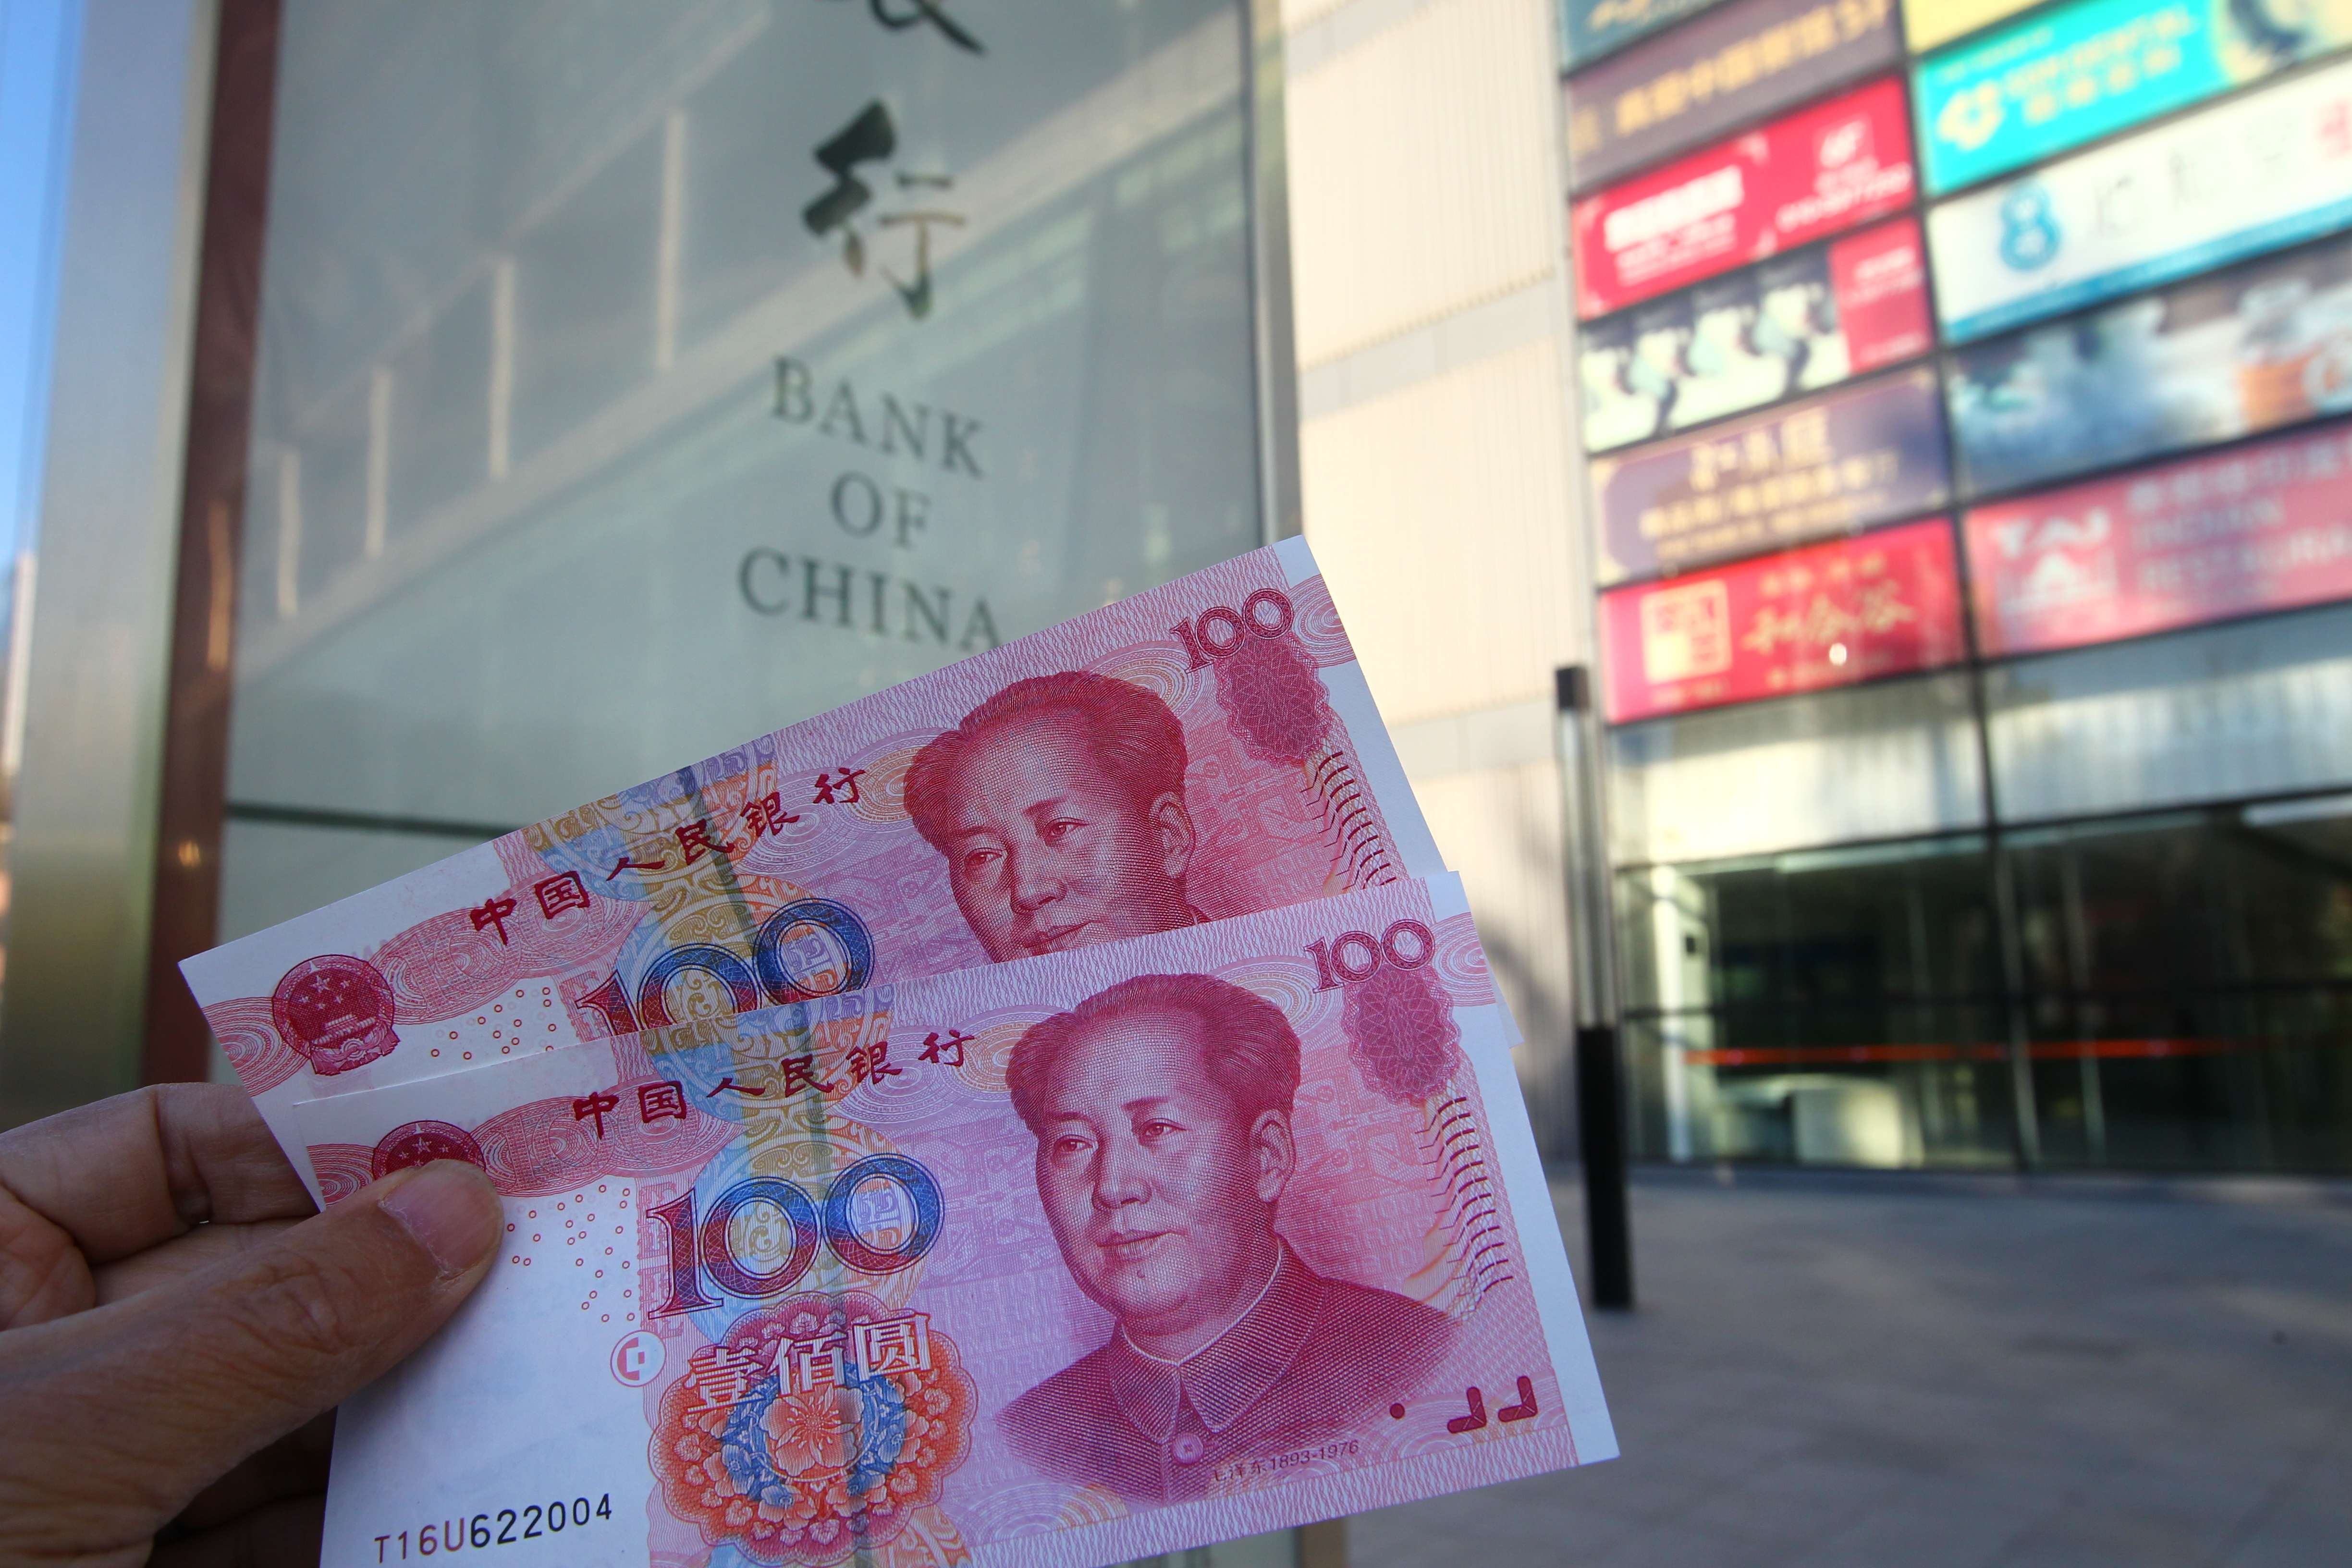 Currency experts and traders are rethinking assumptions after the PBOC surprised the forex market by letting the yuan weaken beyond 6.8 per US dollar